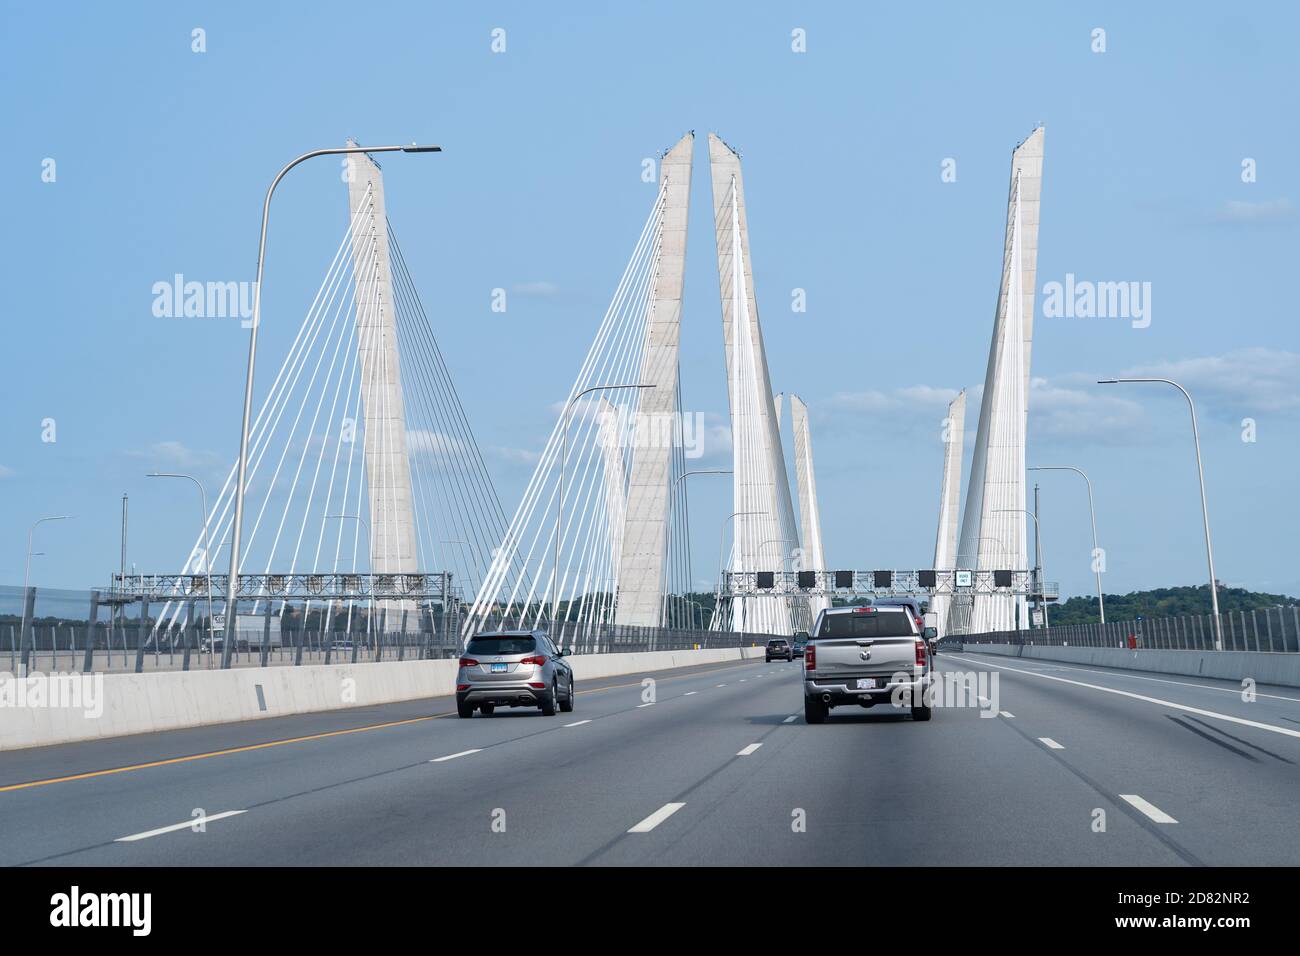 Tarrytown, NY - Sept. 16, 2020: Travelling east on the Governor Mario M. Cuomo Bridge. Stock Photo